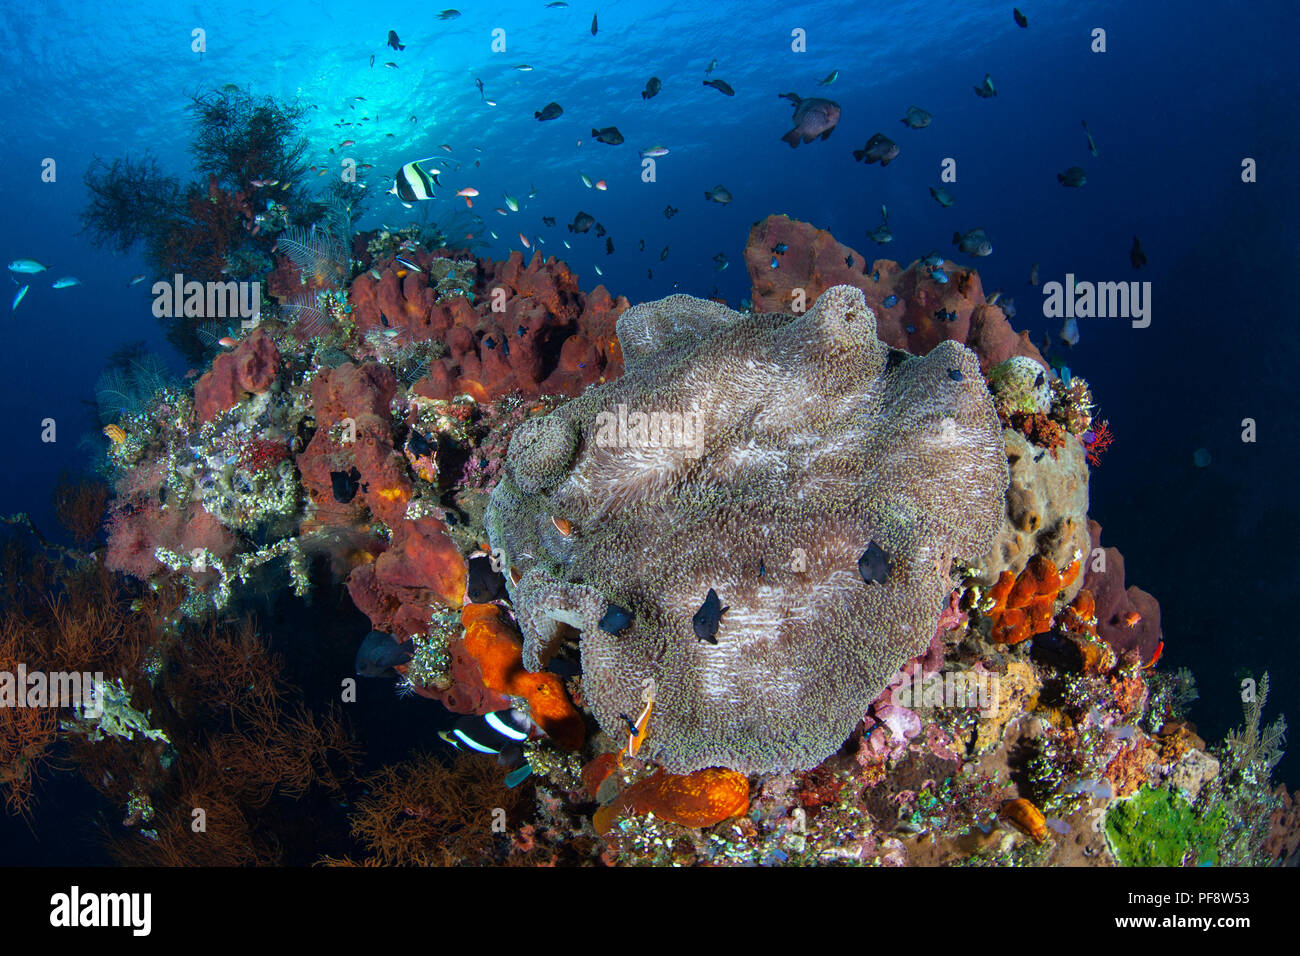 Sea anemone (Heteractis magnifica) and clownfish (Amphiprion ocellaris) at sunrise on the USAT Liberty Wreck in Tulamben Bali Stock Photo